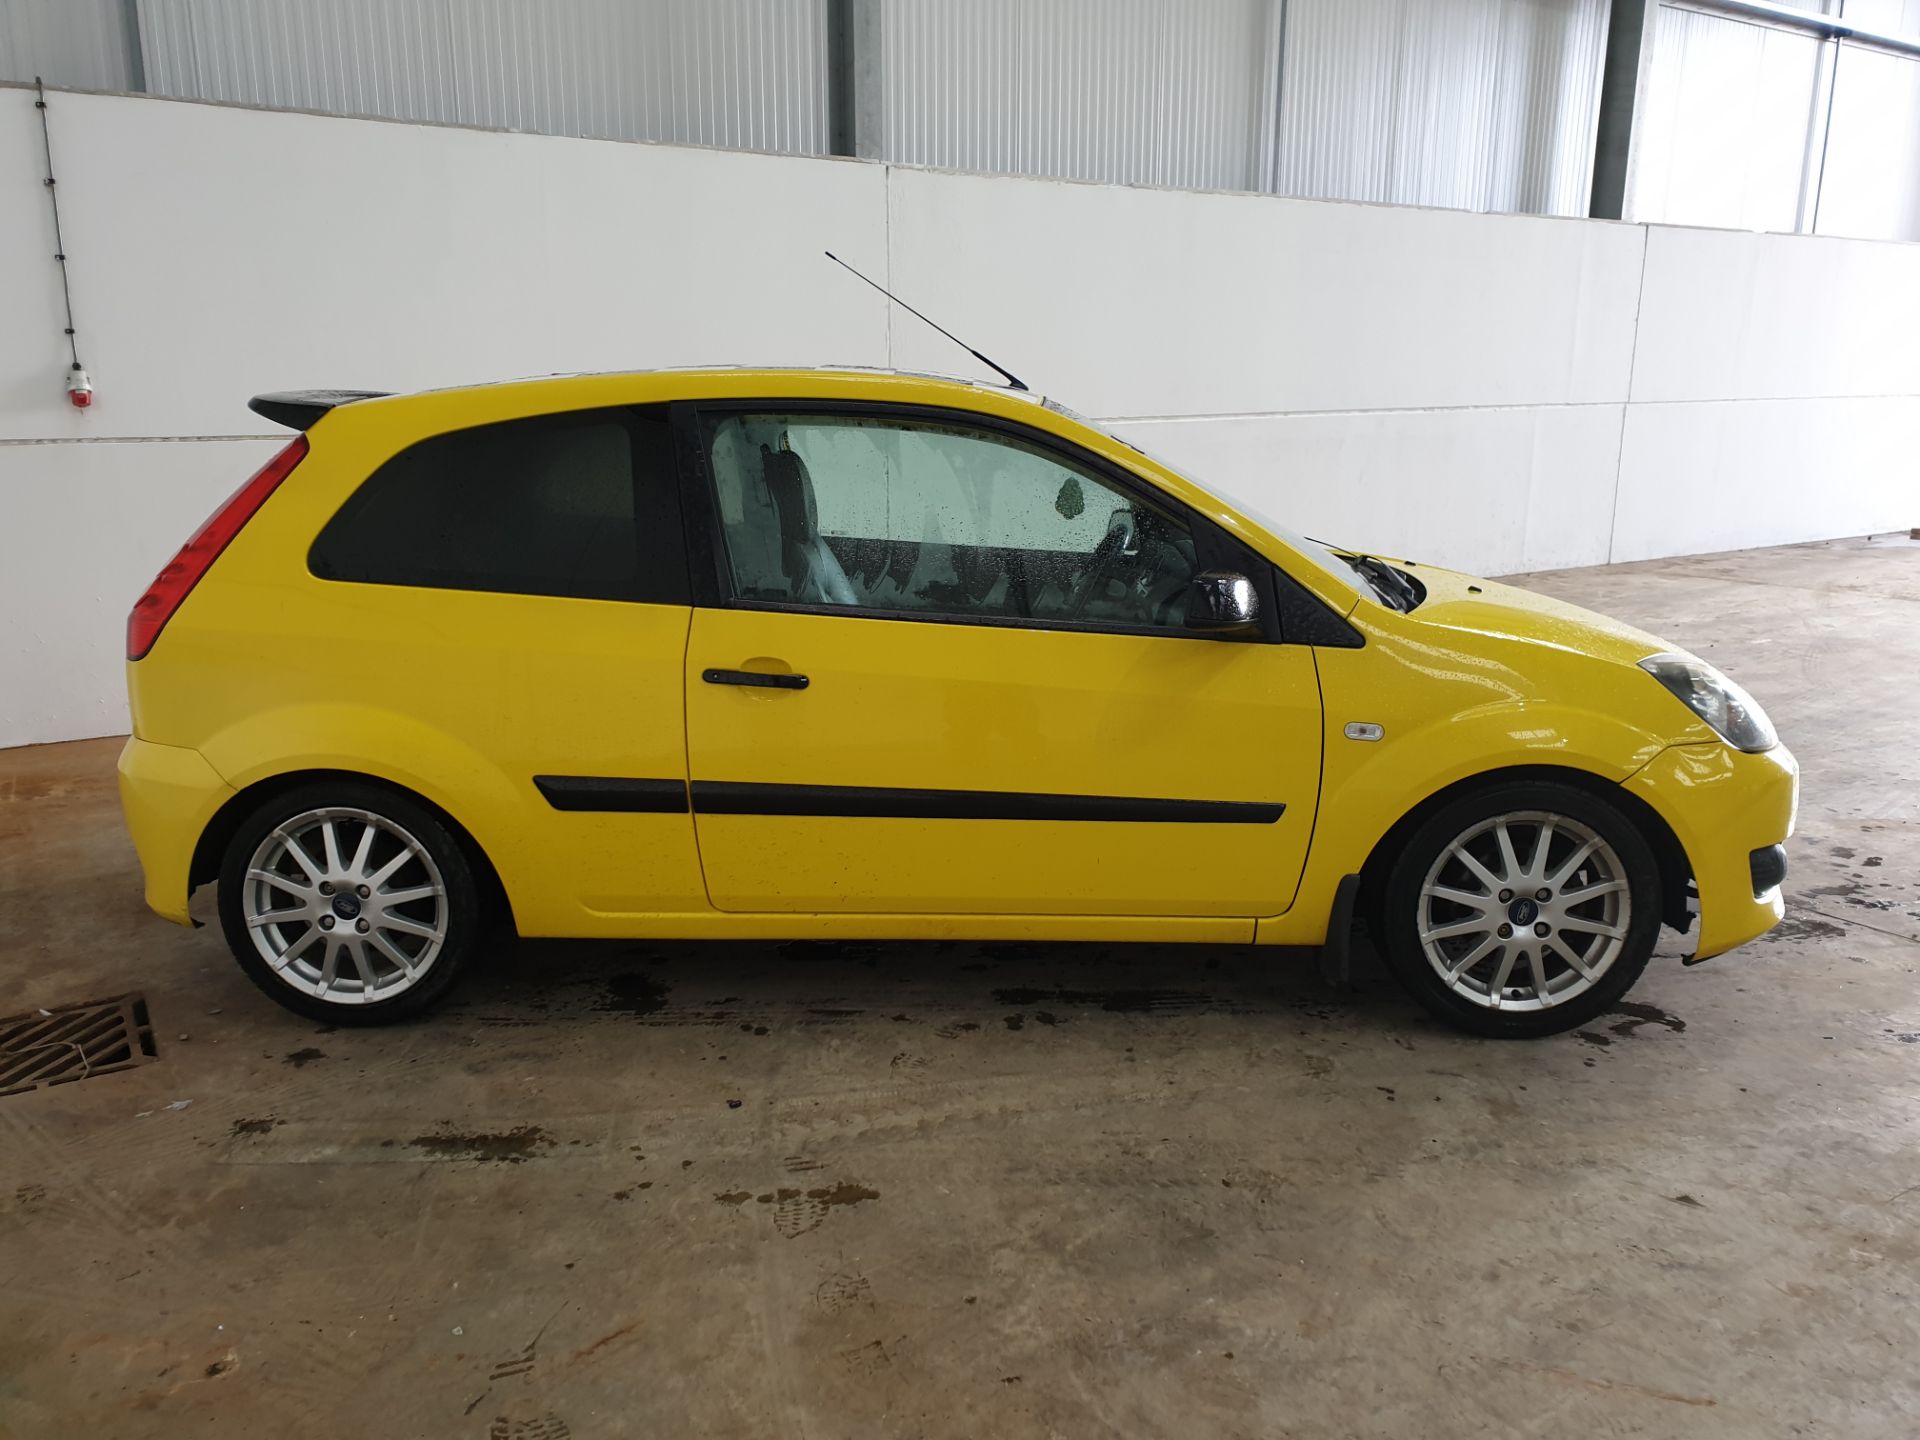 2007 Ford Fiesta Zetec S Special edition - Image 2 of 13